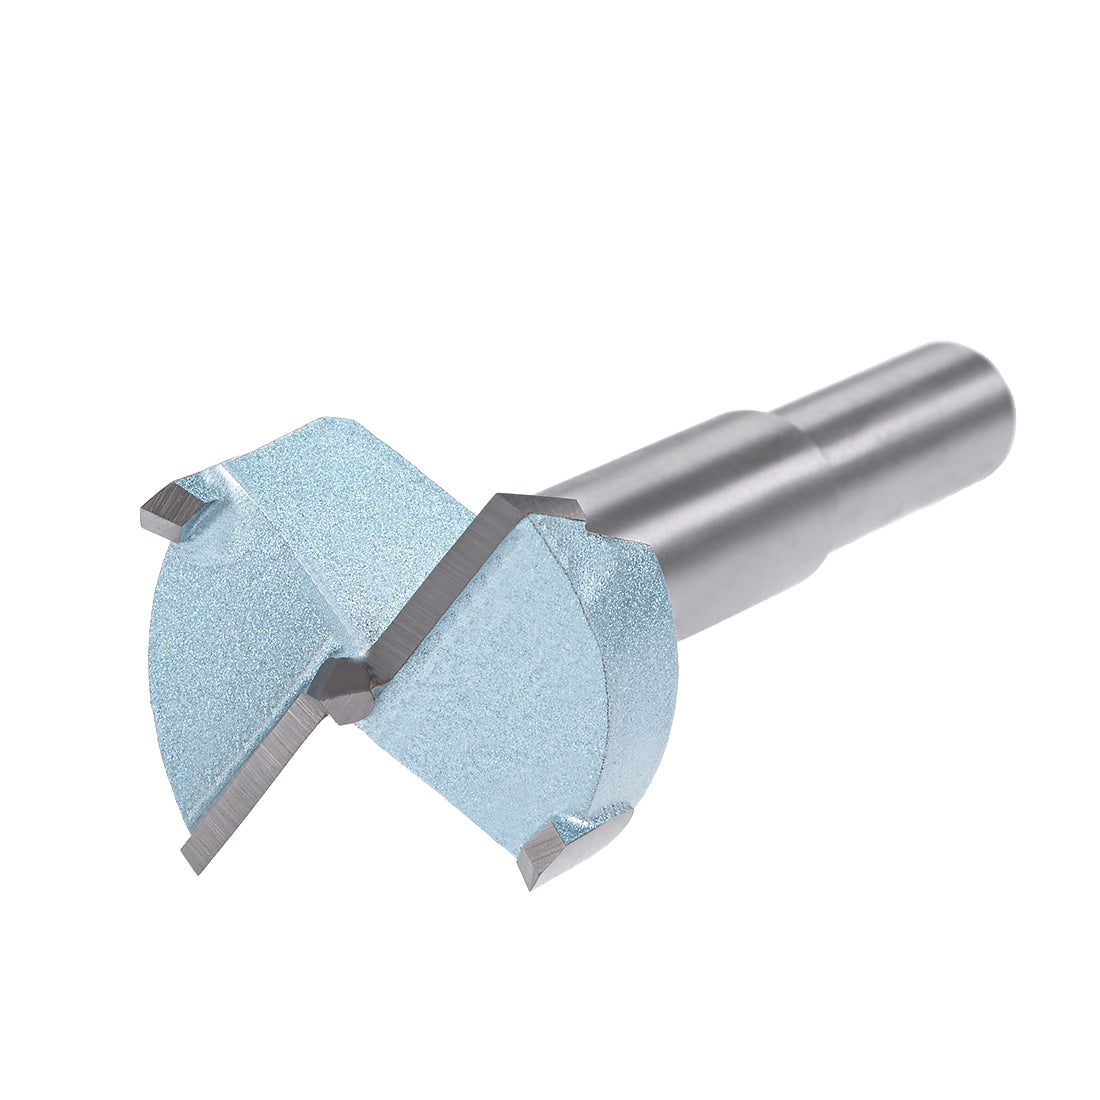 uxcell Uxcell 70mm Dia Hinge Boring Forstner Drill Bit with 10mm Shank